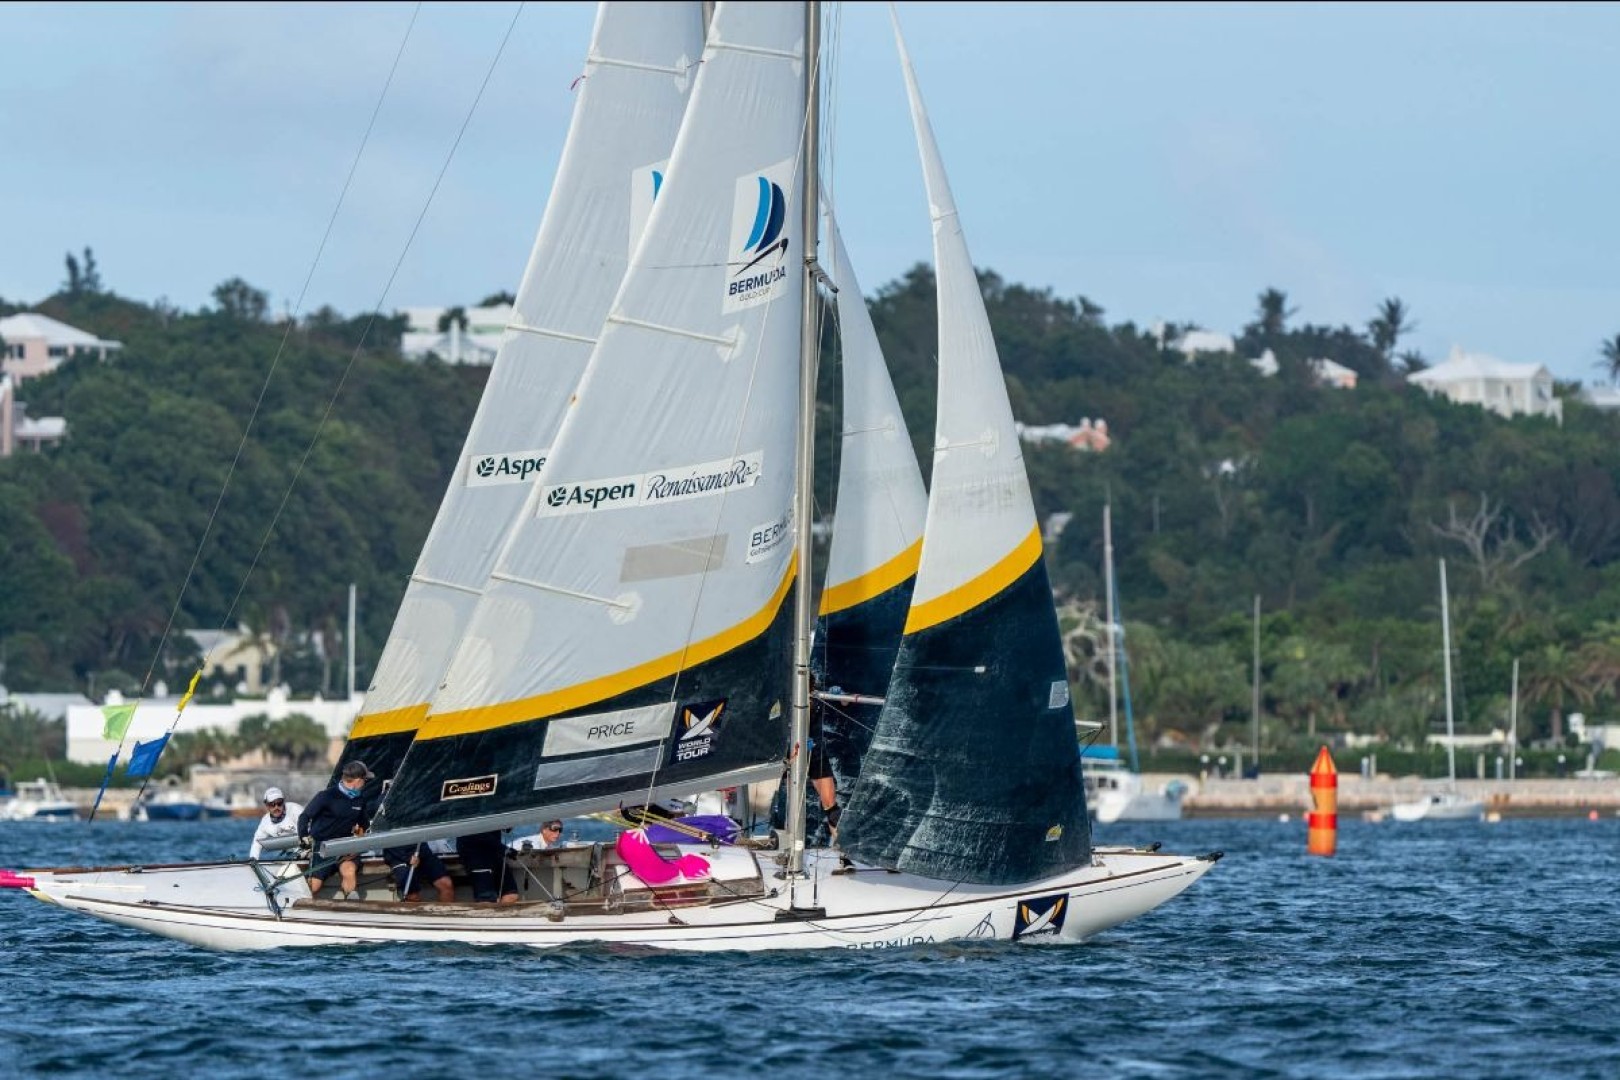 Bermuda Gold Cup through quarter-finals with Tropical storm on horizon